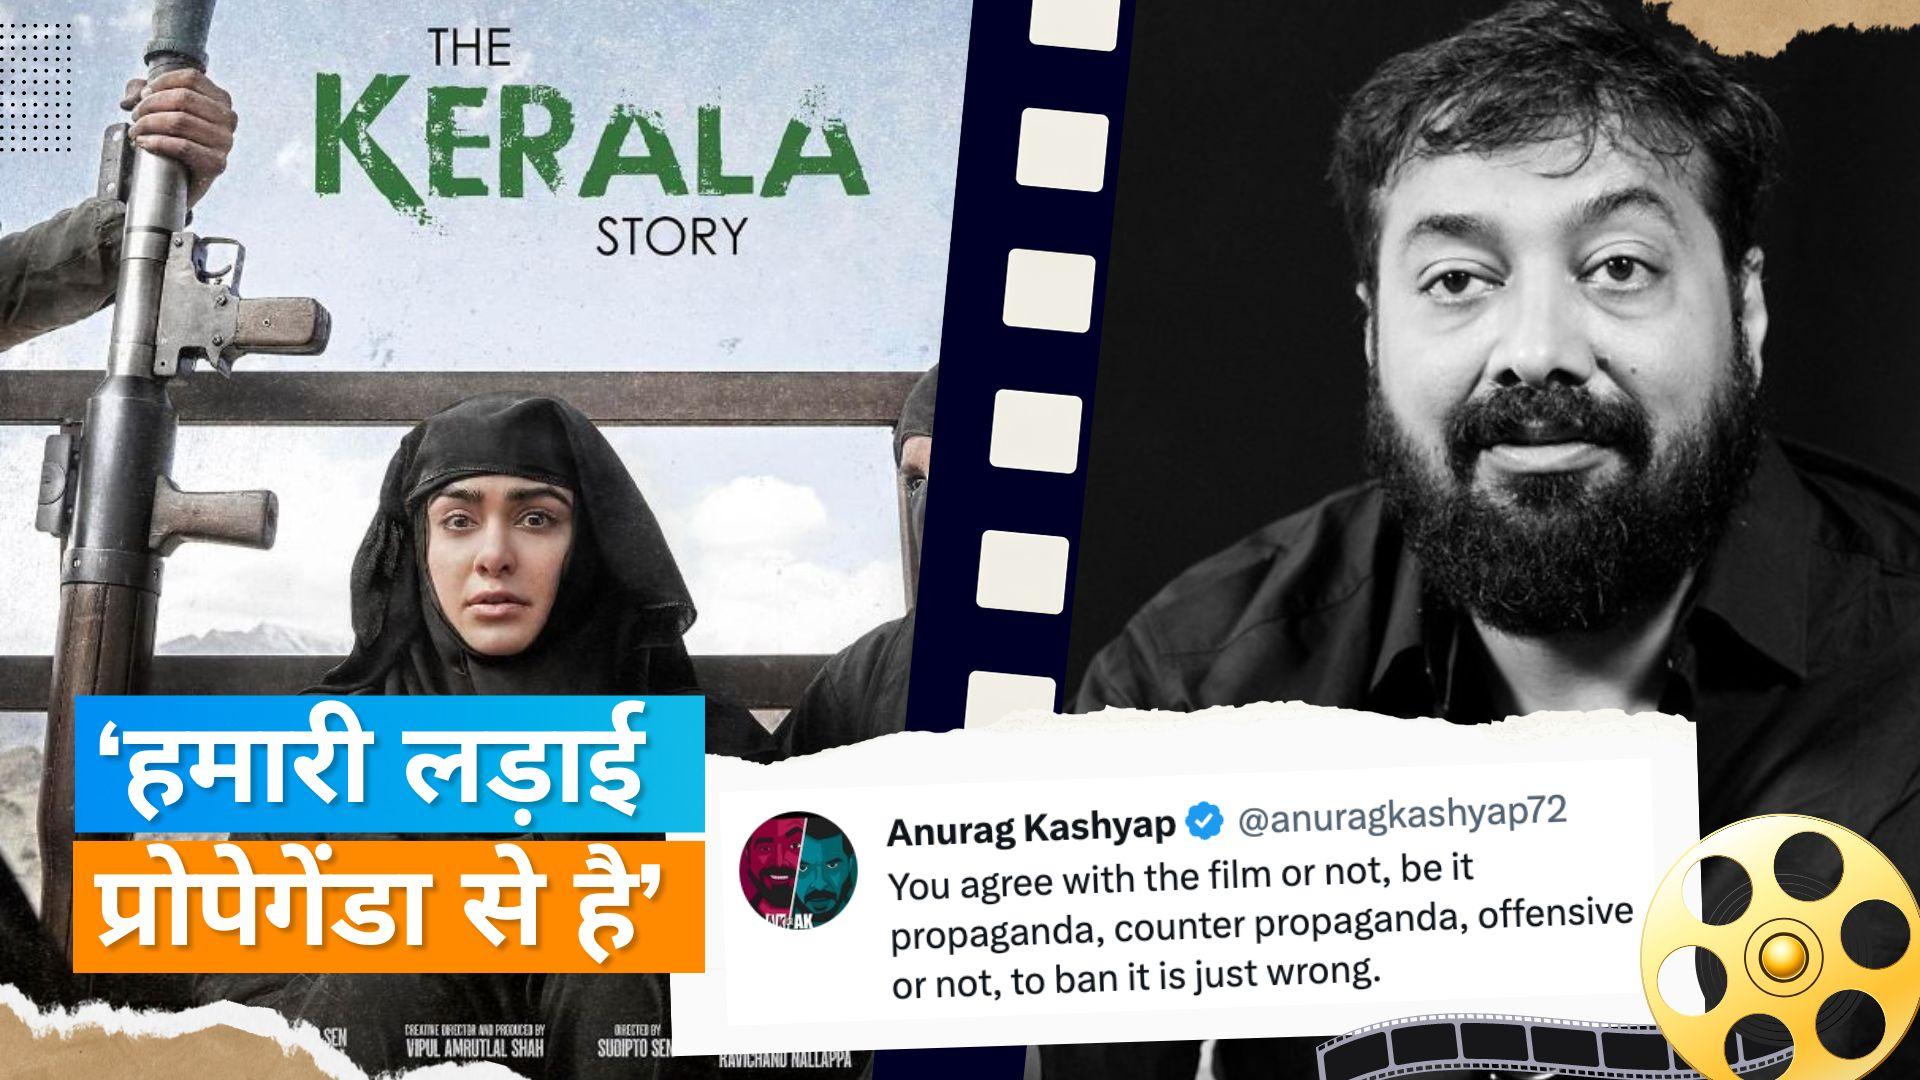 Anurag Kashyap's Statement On 'The Kreala Story' Controversy 2023